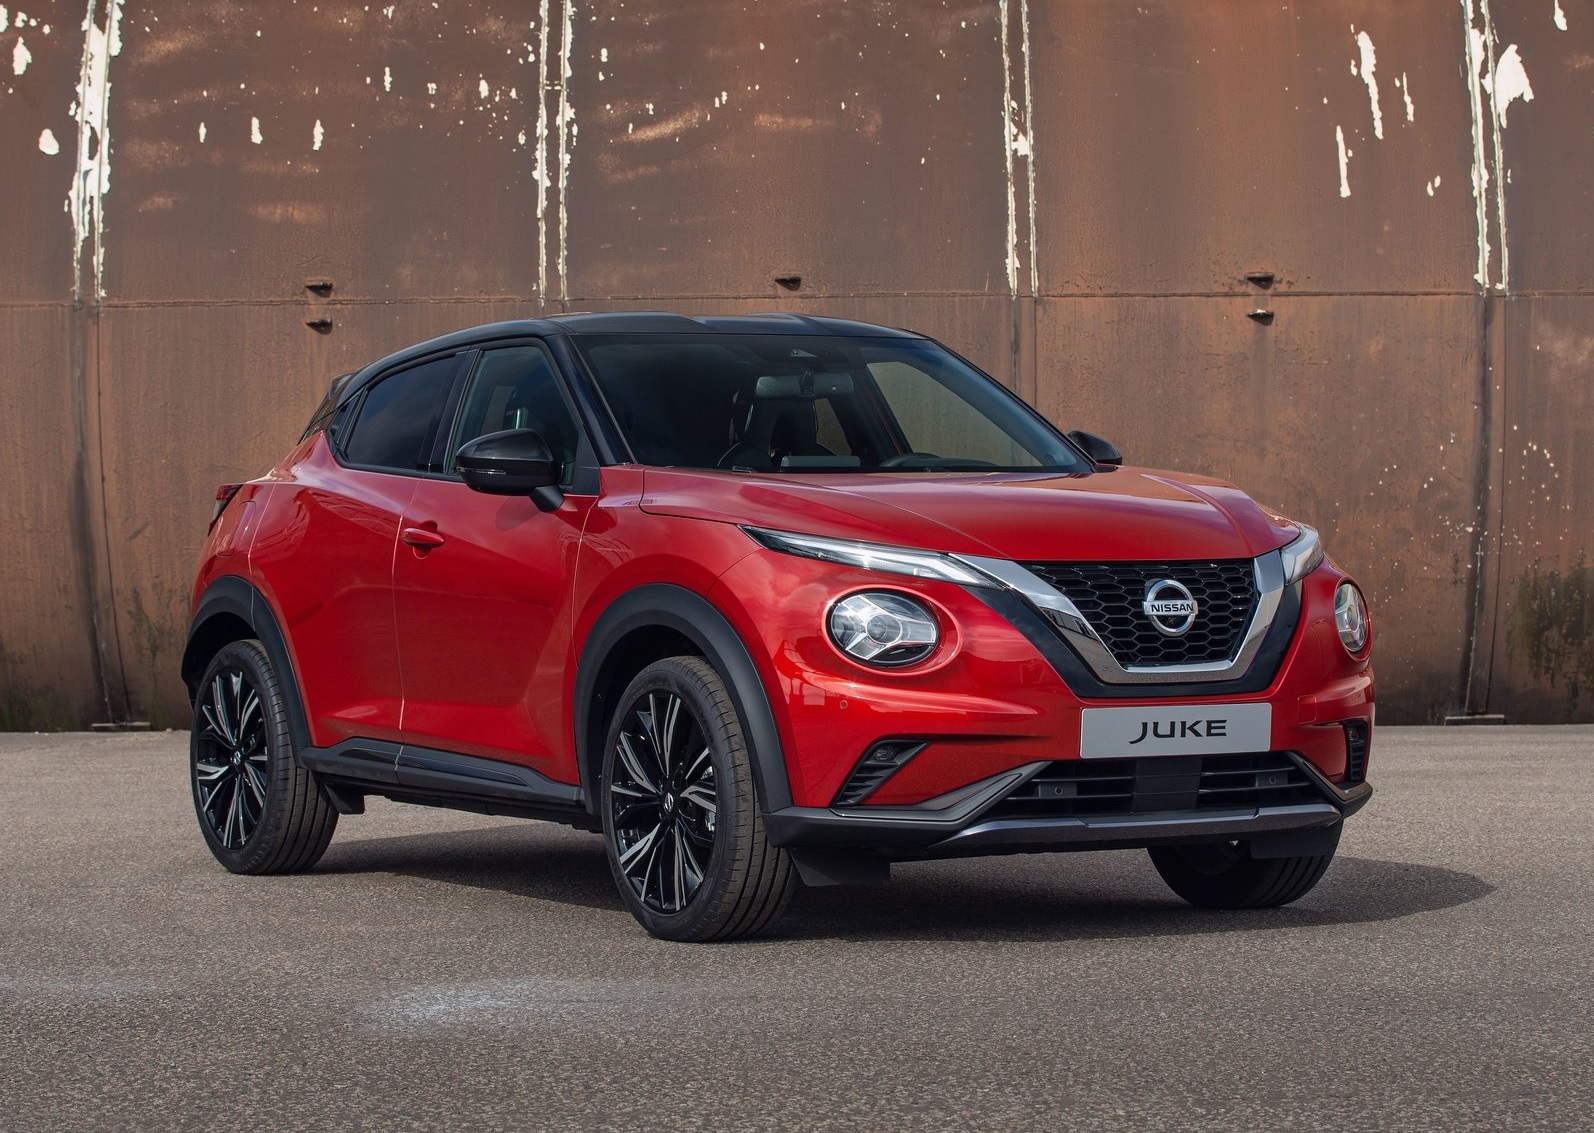 2021 Nissan Juke: Expectations and what we know so far